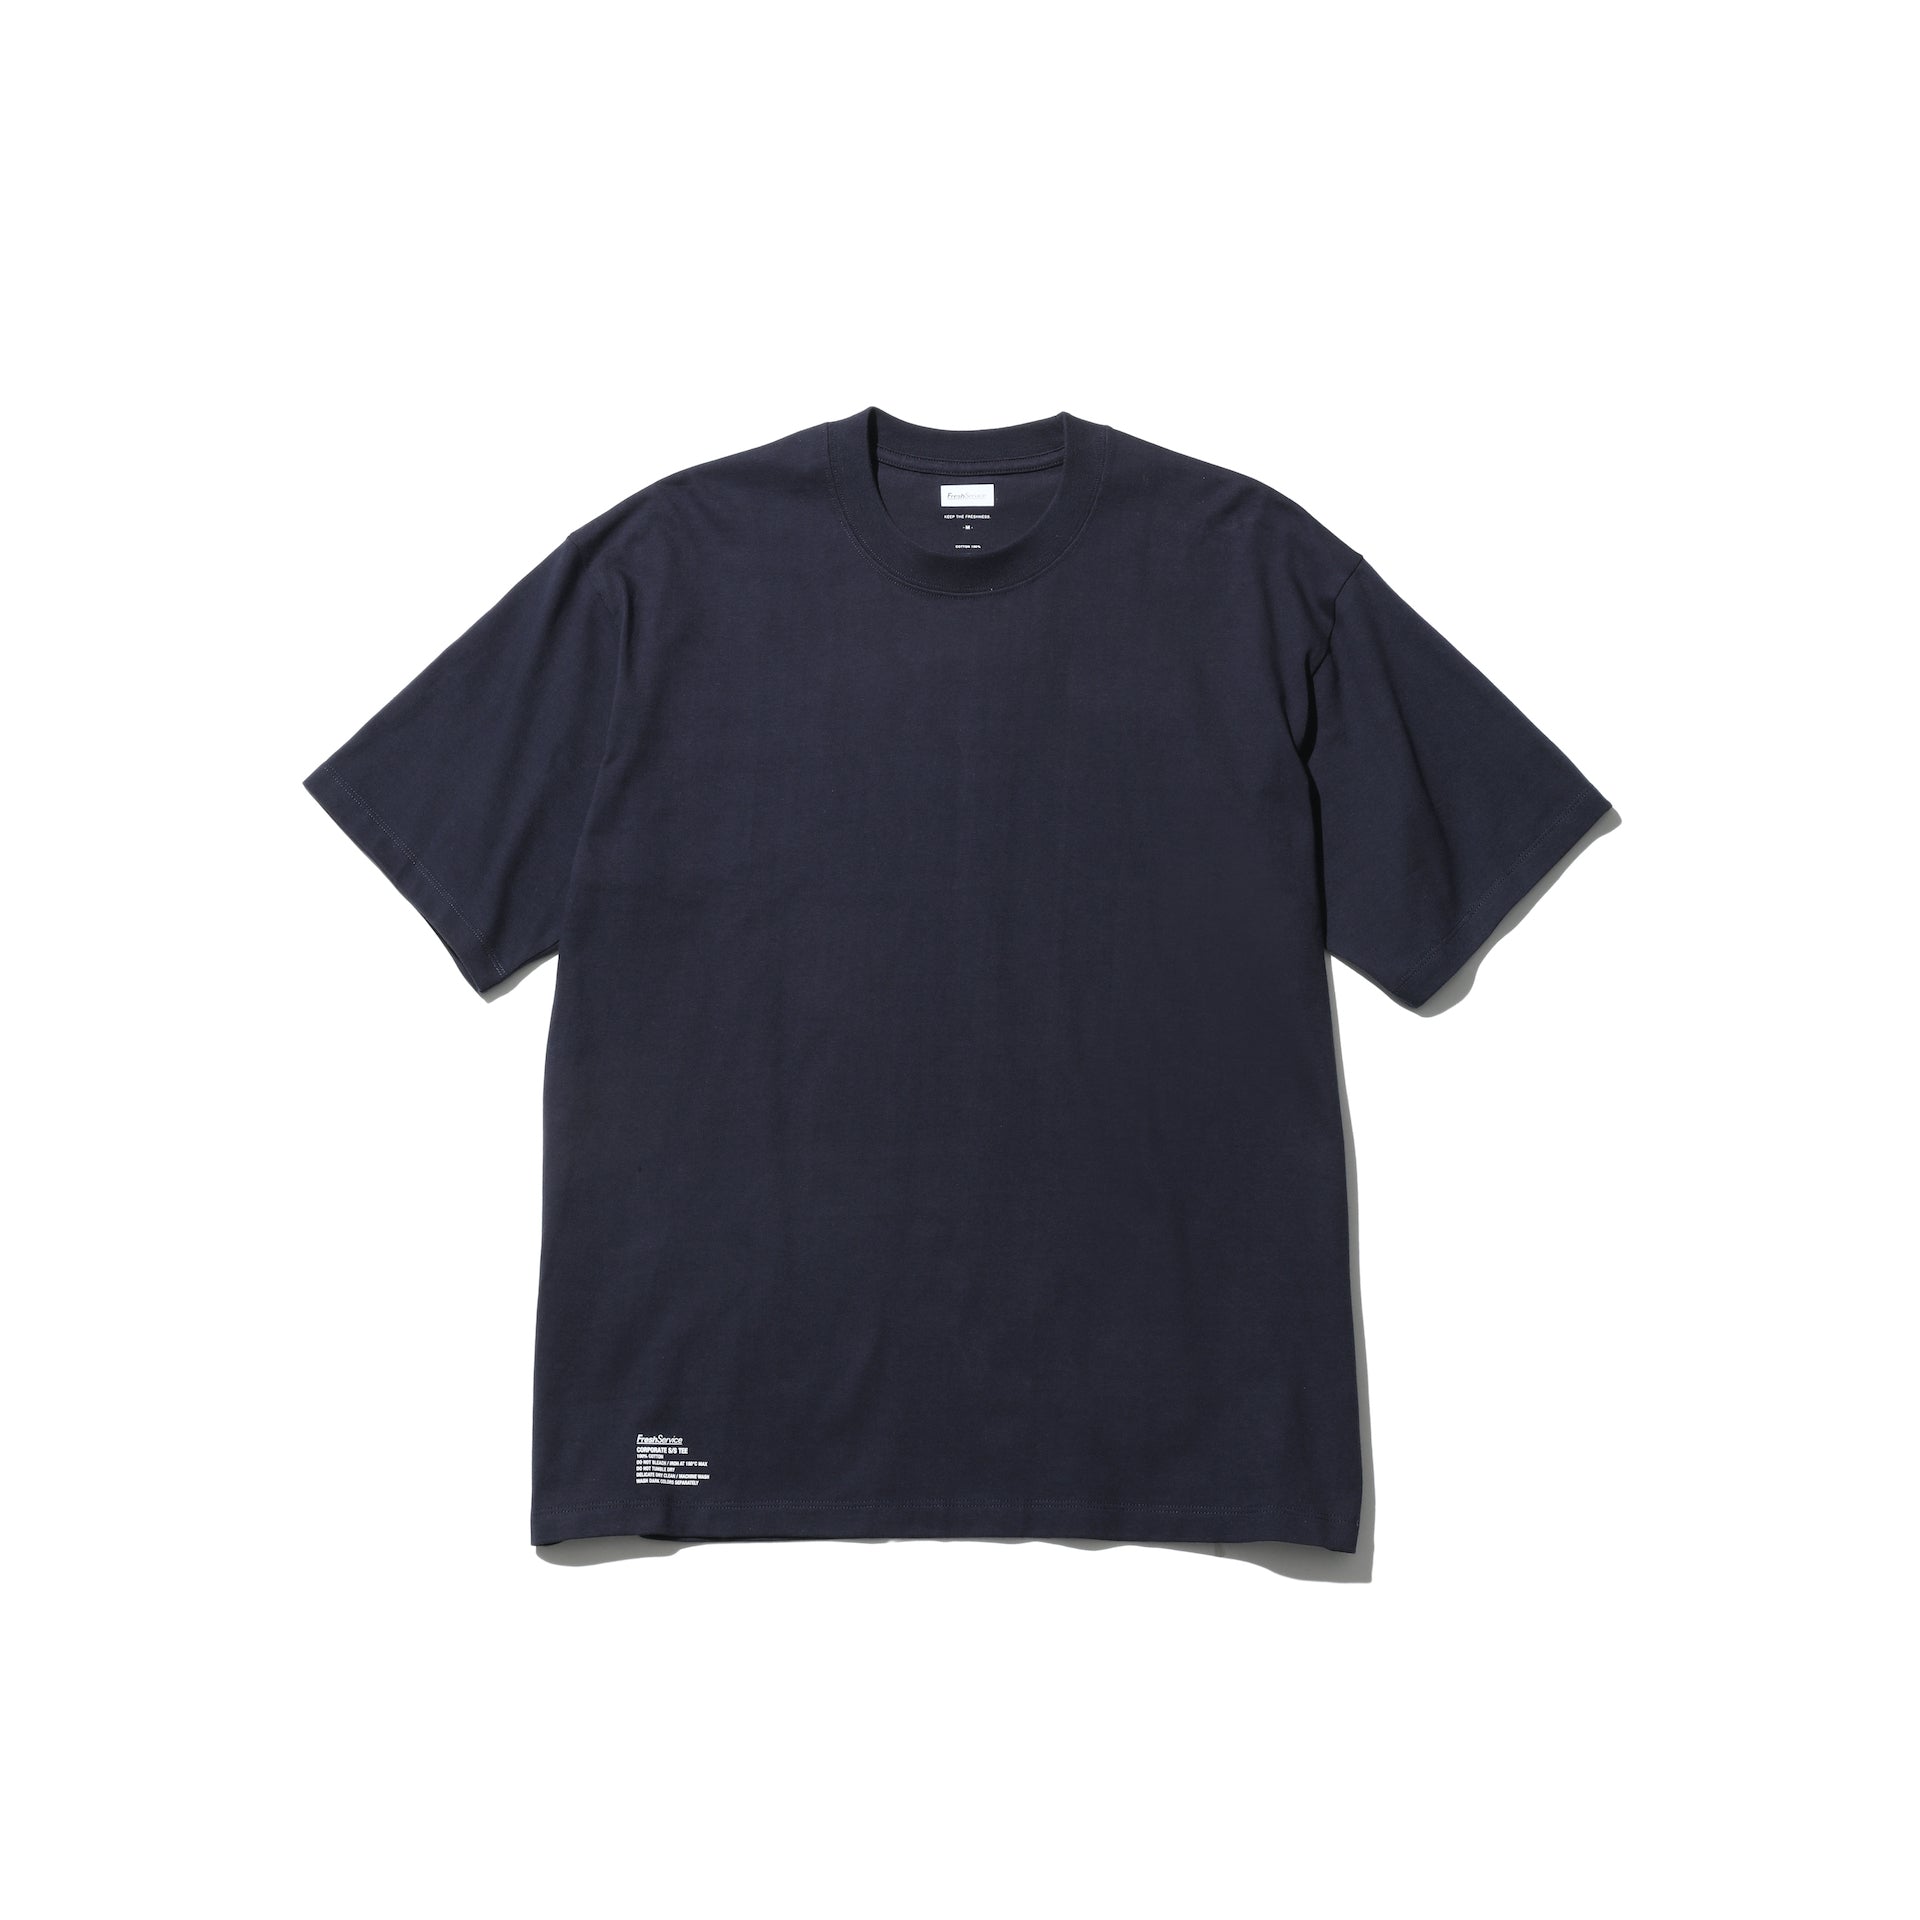 2-PACK CORPORATE S/S TEE – FreshService® official site